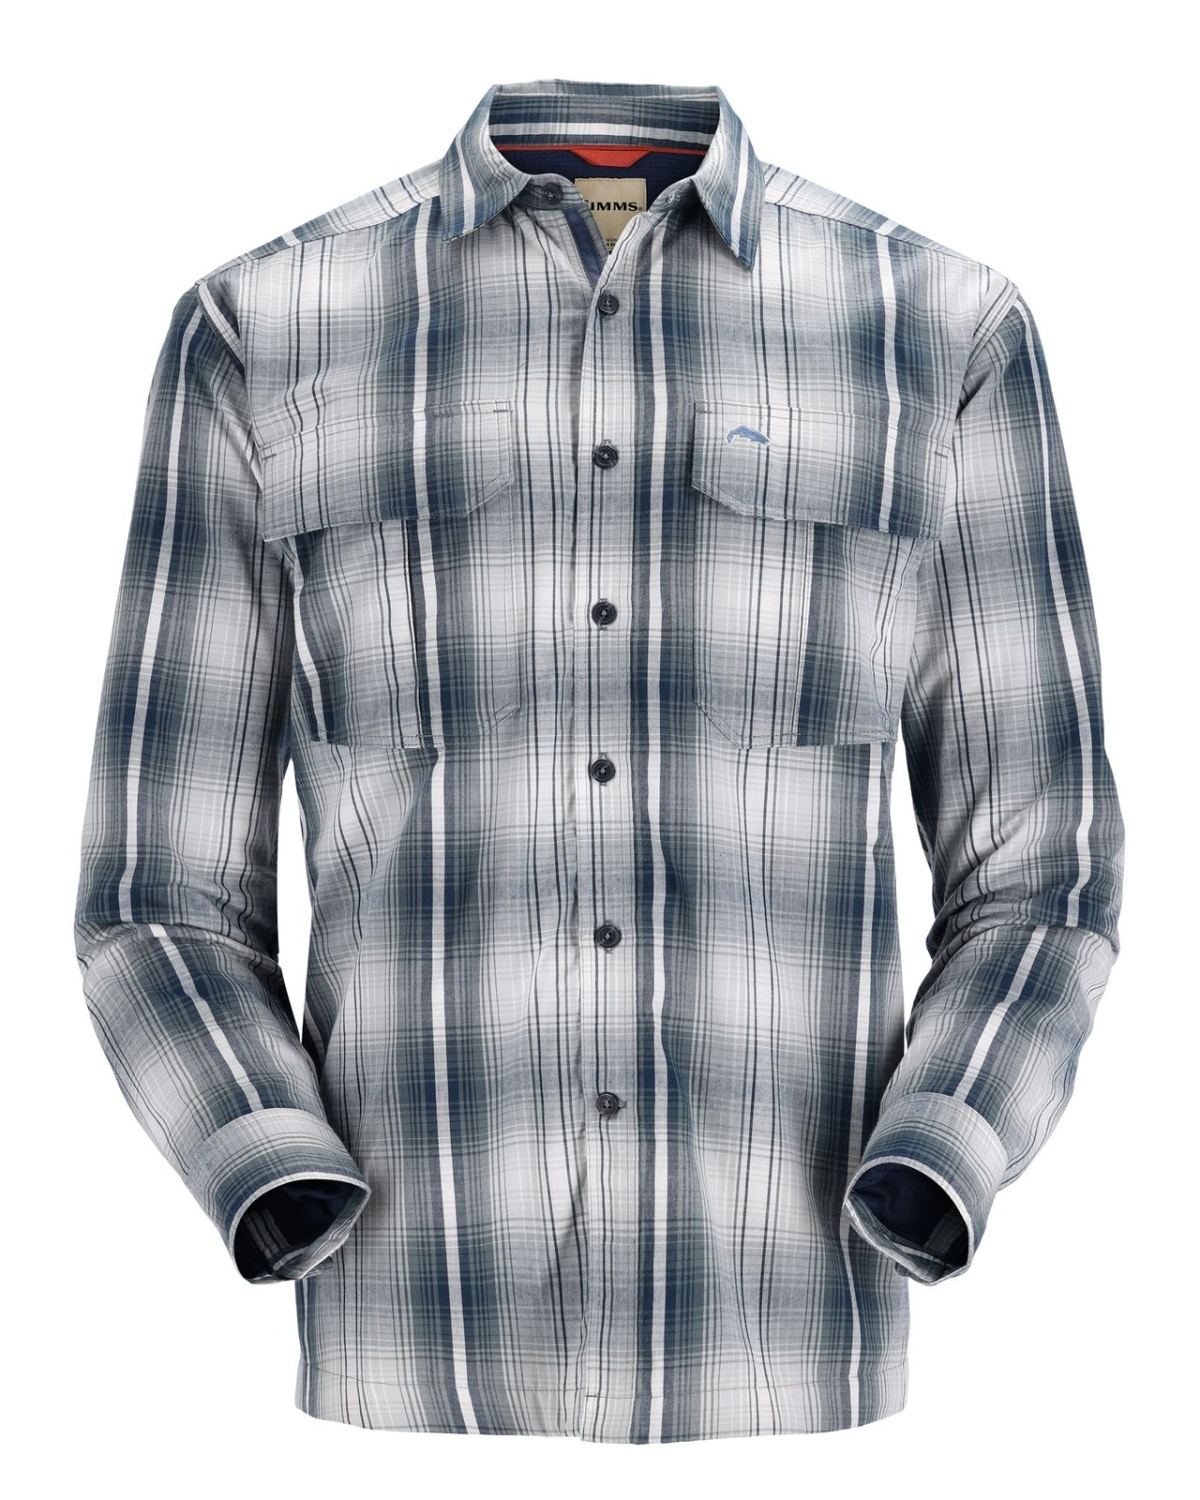 Simms Coldweather Shirt Navy Sterling Plaid